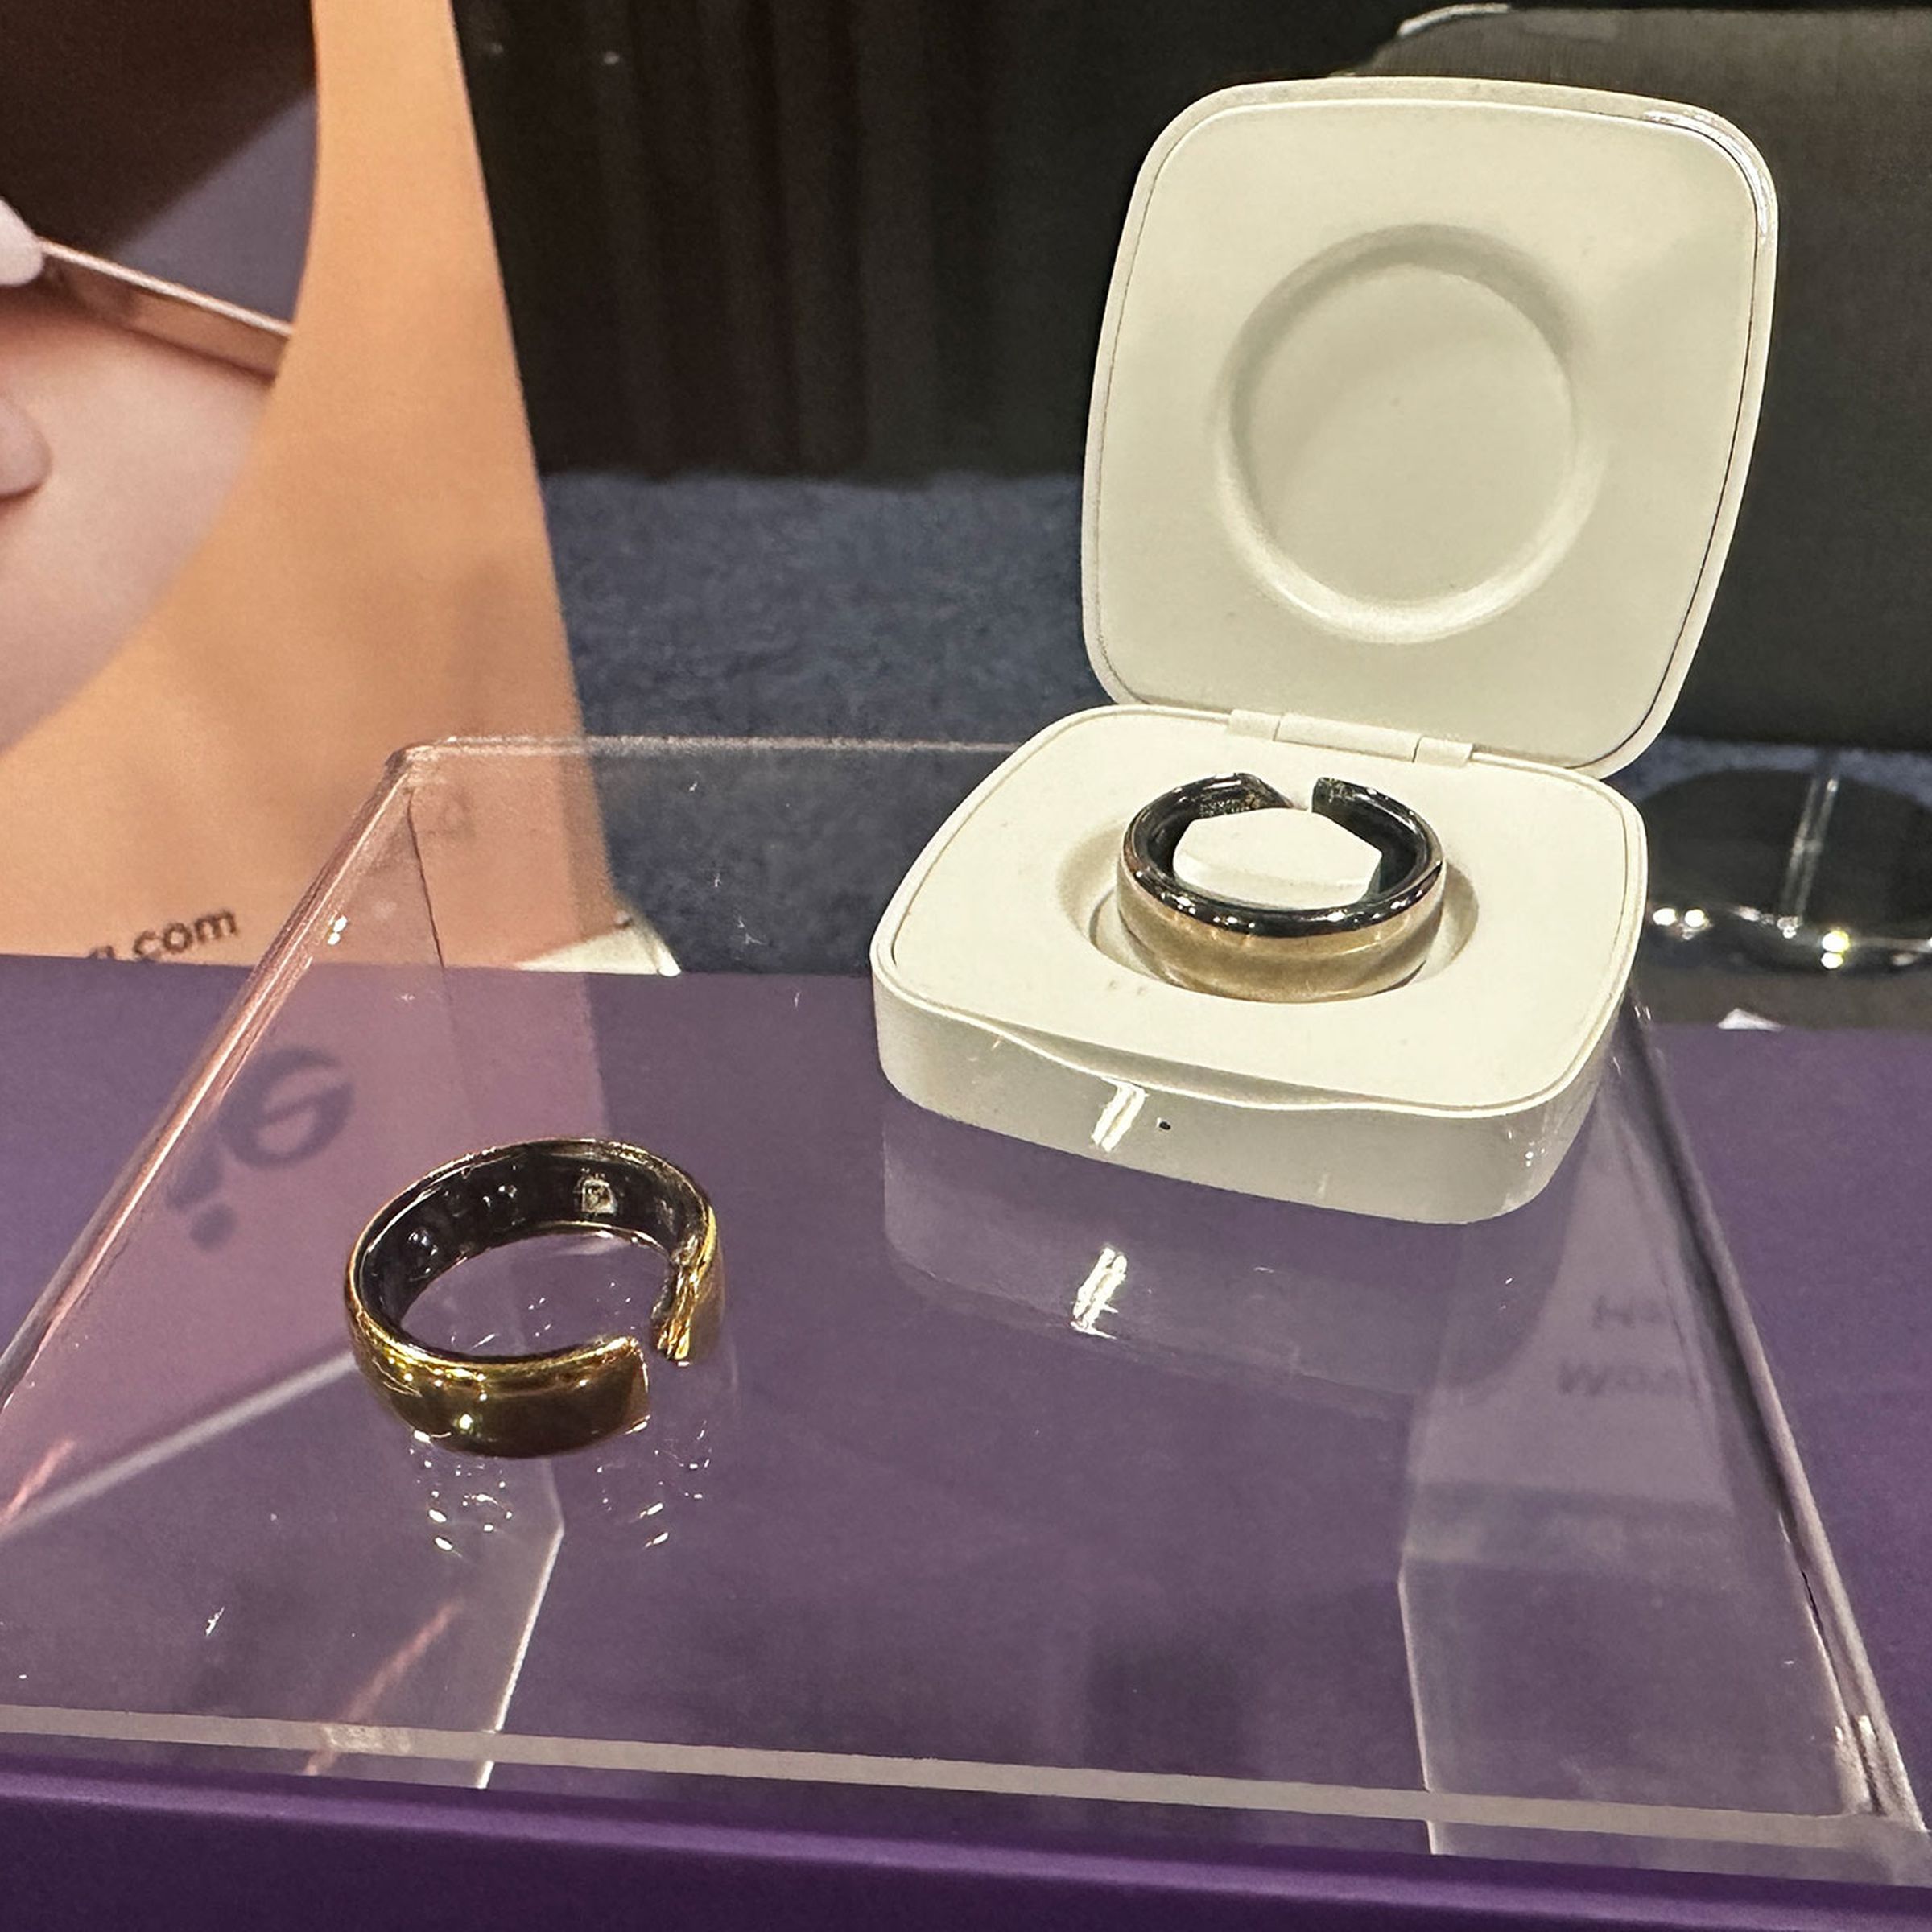 Movano’s Evie Ring and Charging case at CES Unveiled